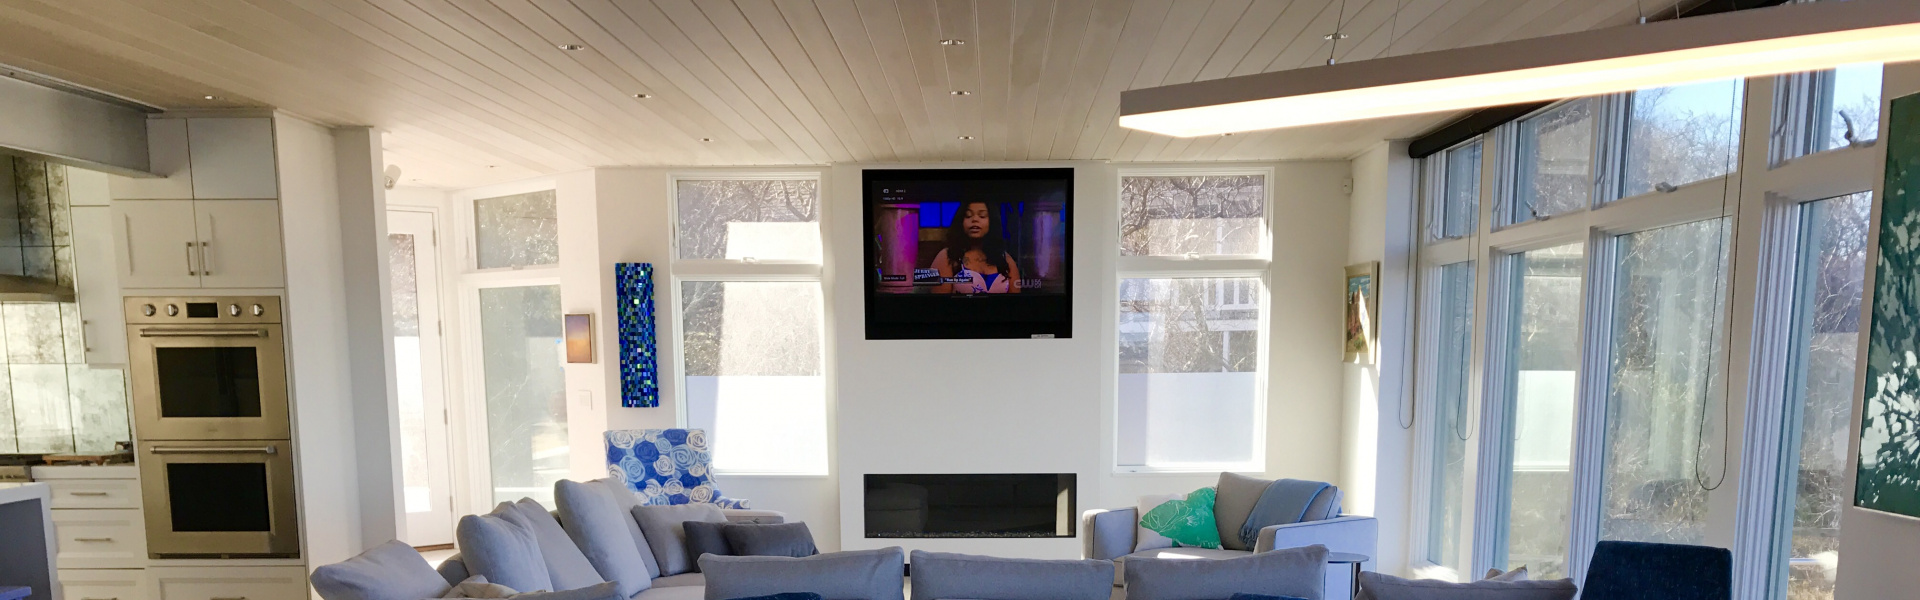 Smart home installation by Technical Operations And Development  for Falmouth